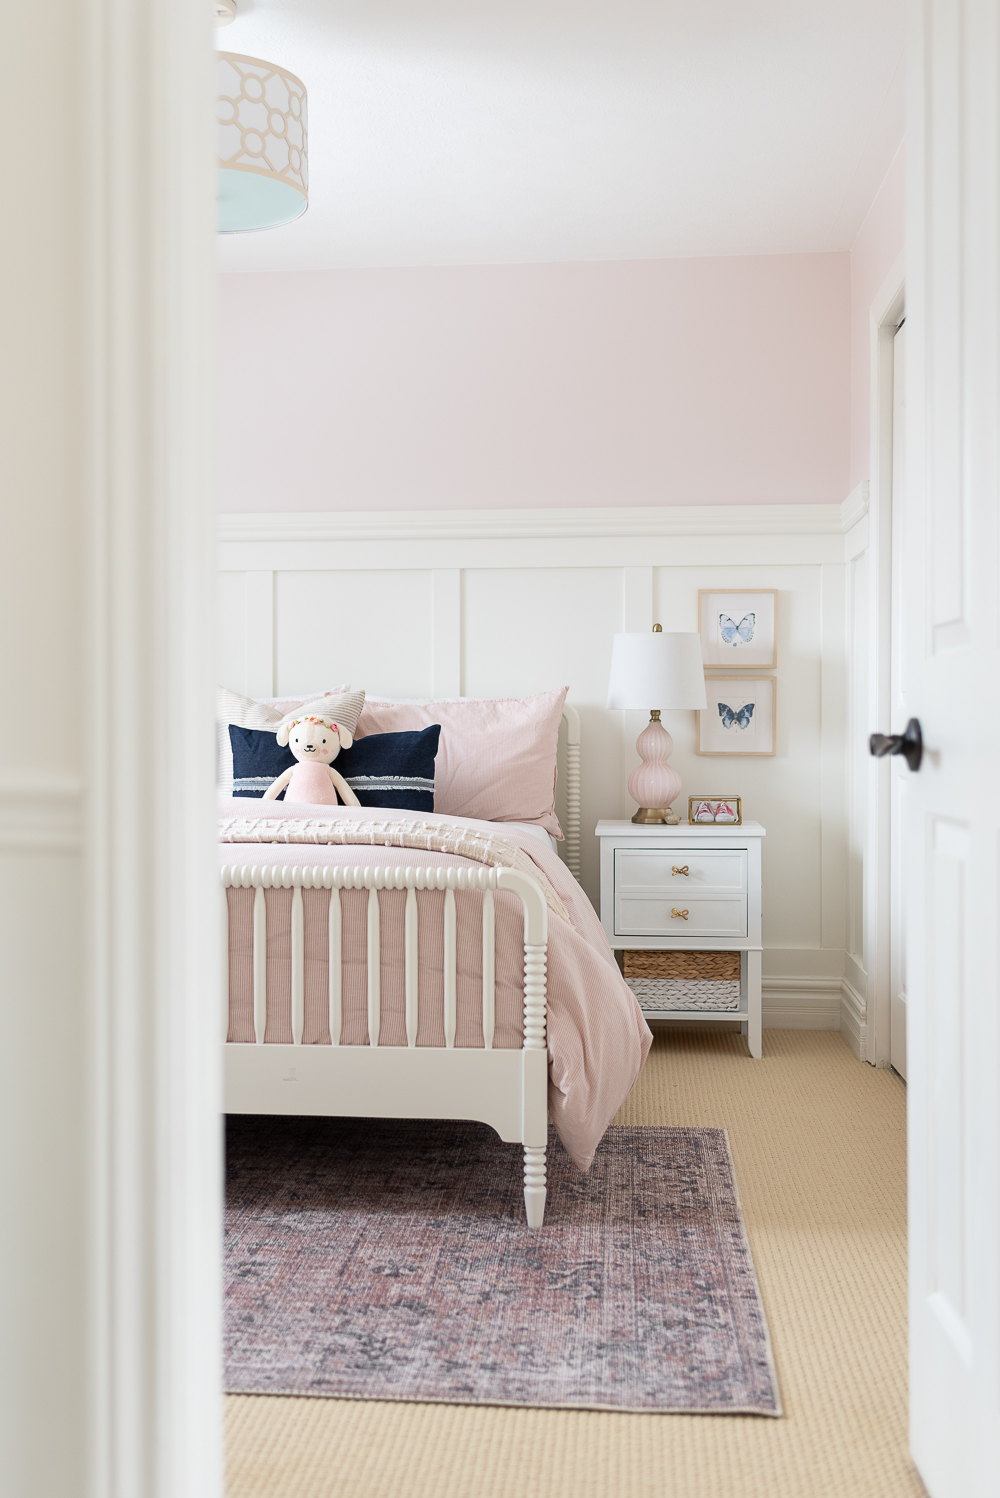 Sweet And Playful Kid'S Bedroom In Shades Of Pink And Blue - Nick + Alicia